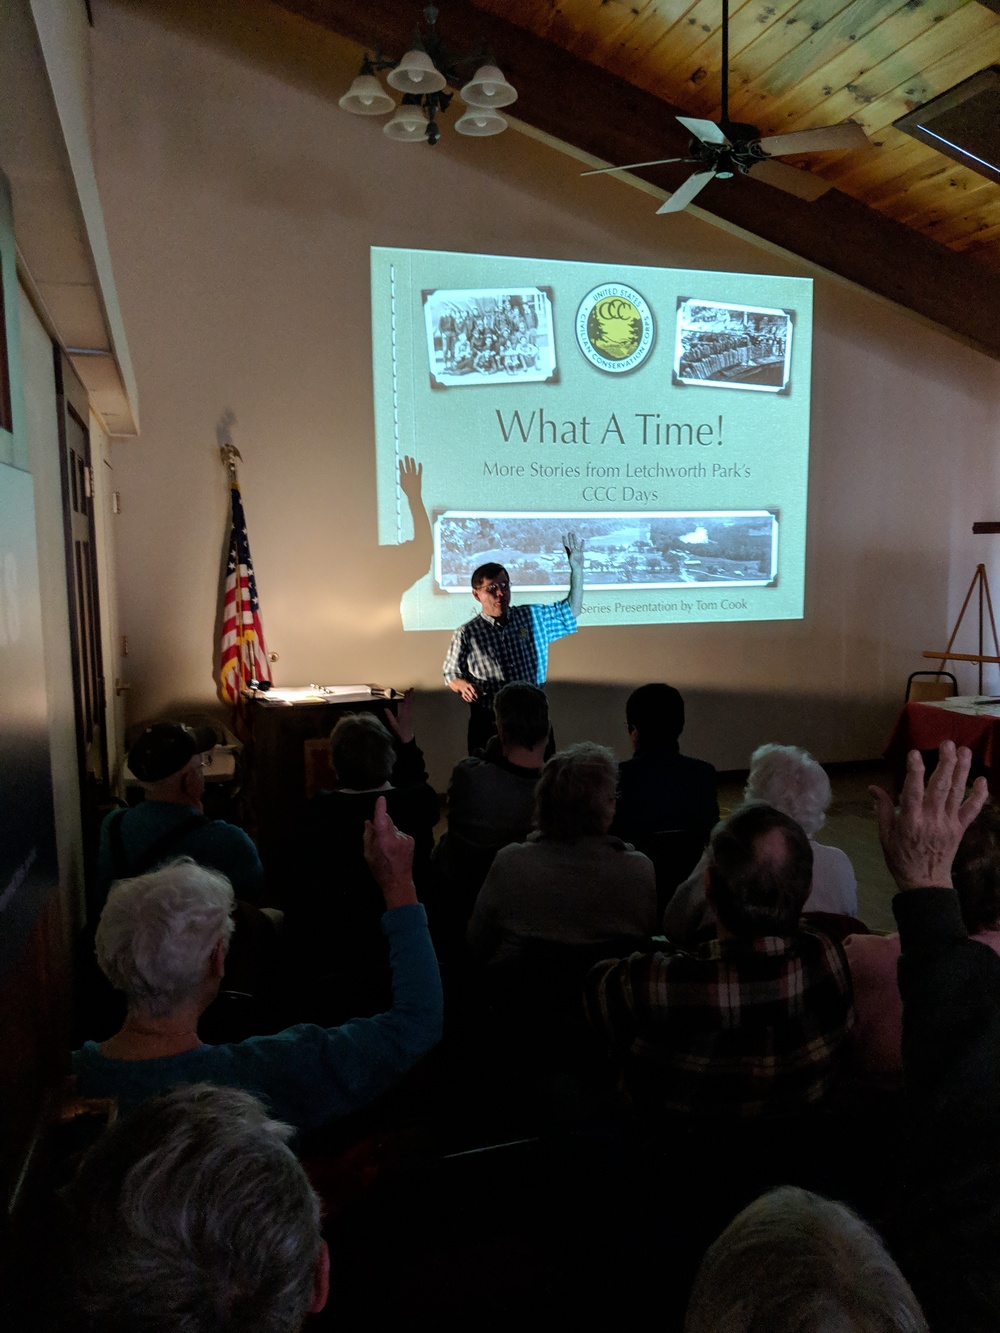 Mount Morris Dam's Winter Discovery Series presented &quot;What a Time!&quot; lecture